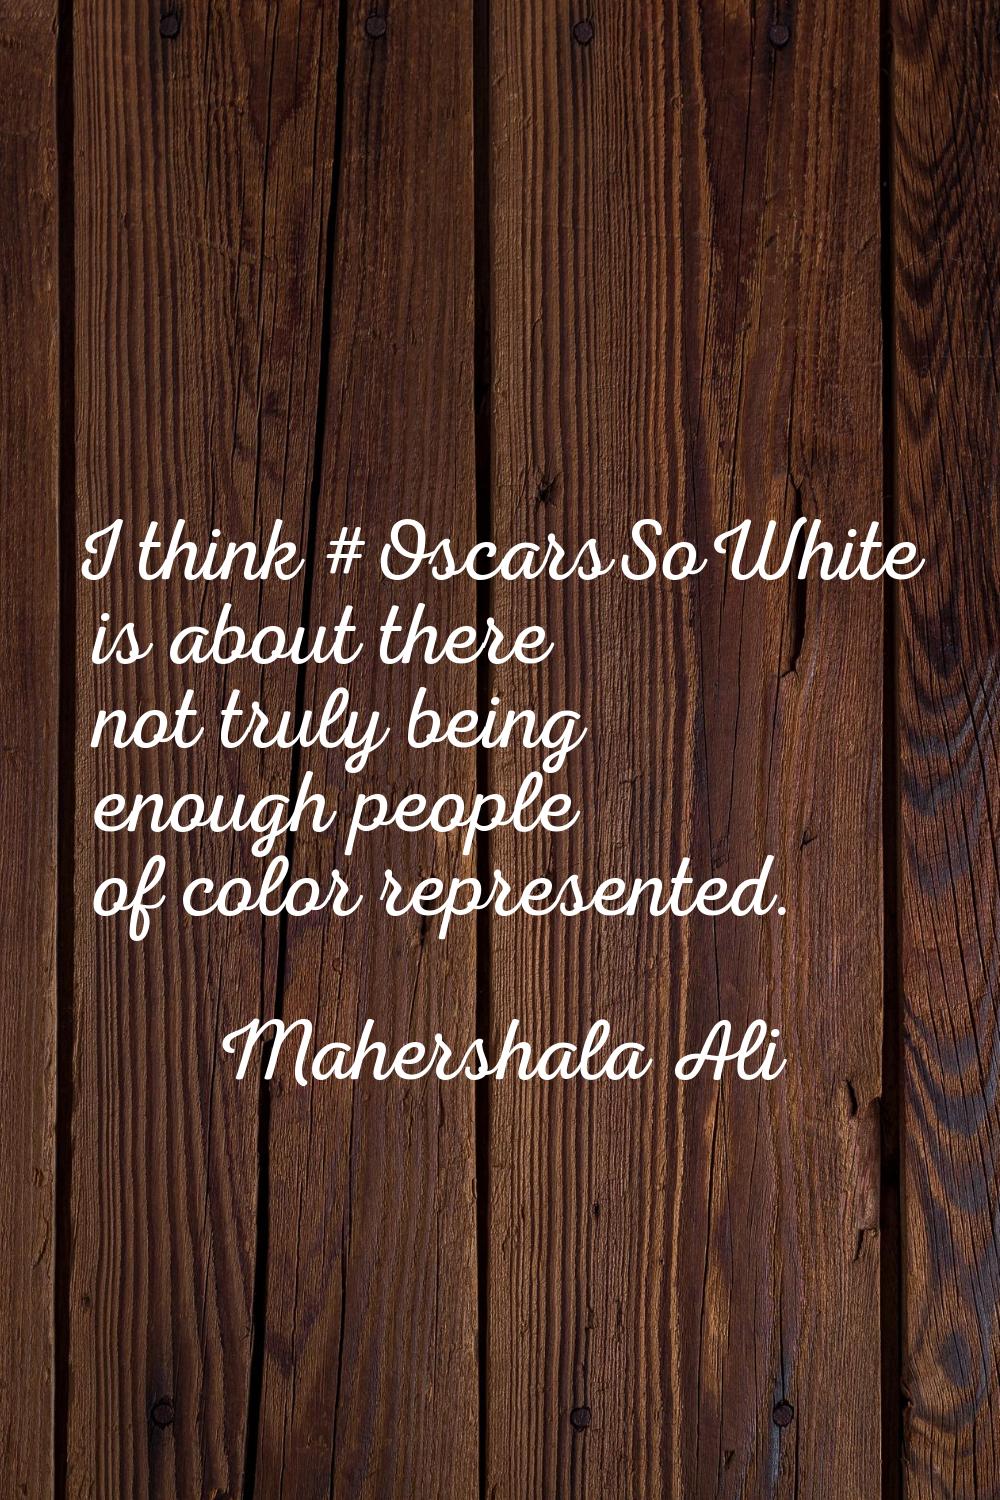 I think #OscarsSoWhite is about there not truly being enough people of color represented.